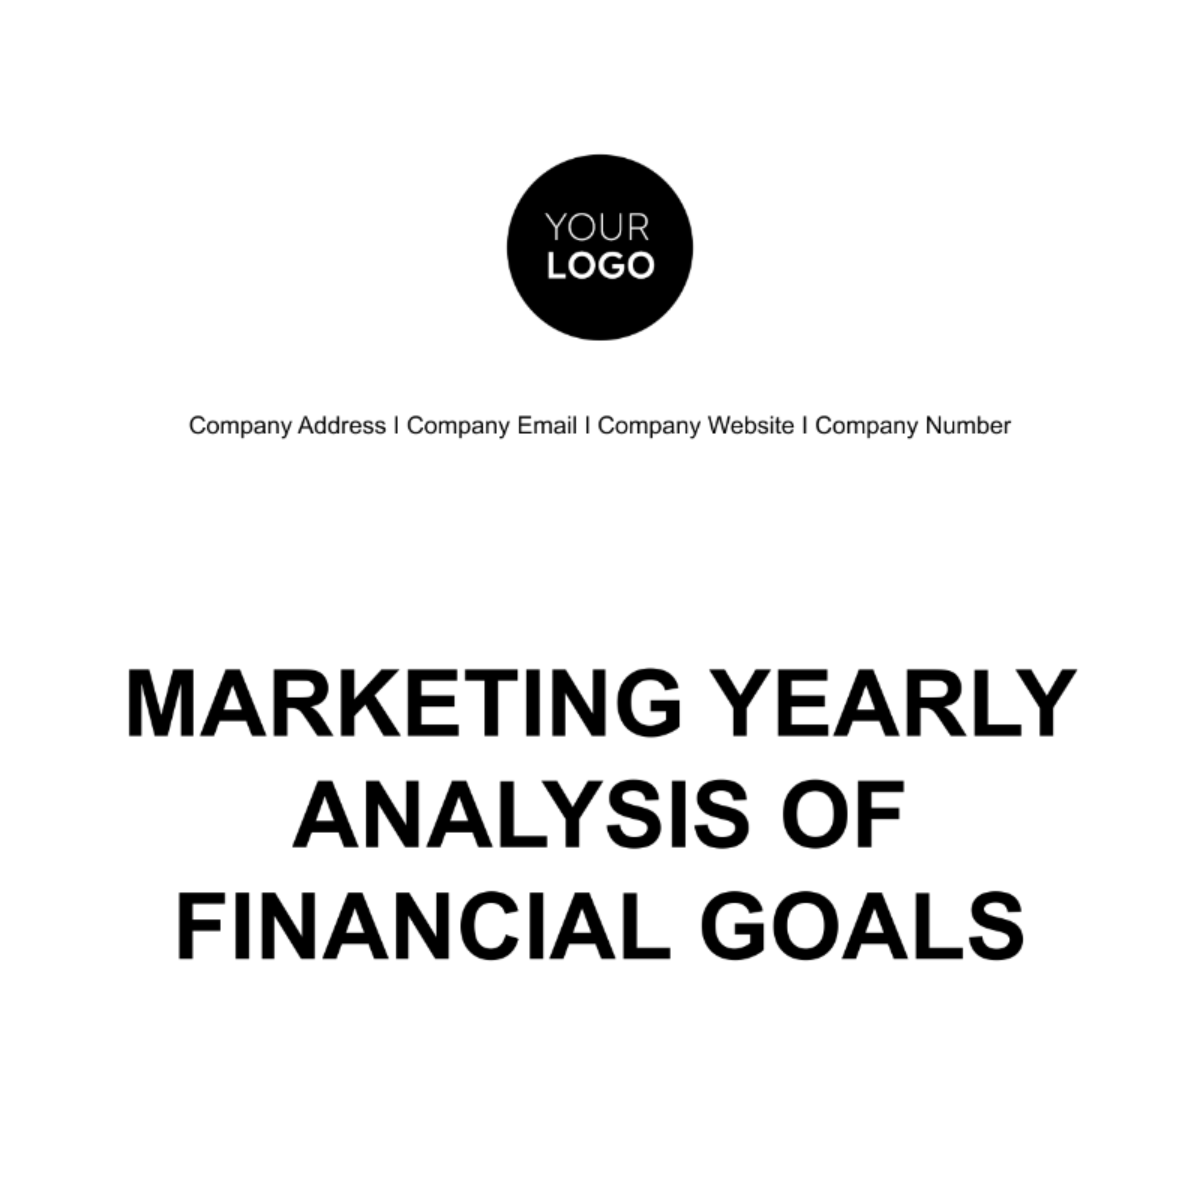 Marketing Yearly Analysis of Financial Goals Template